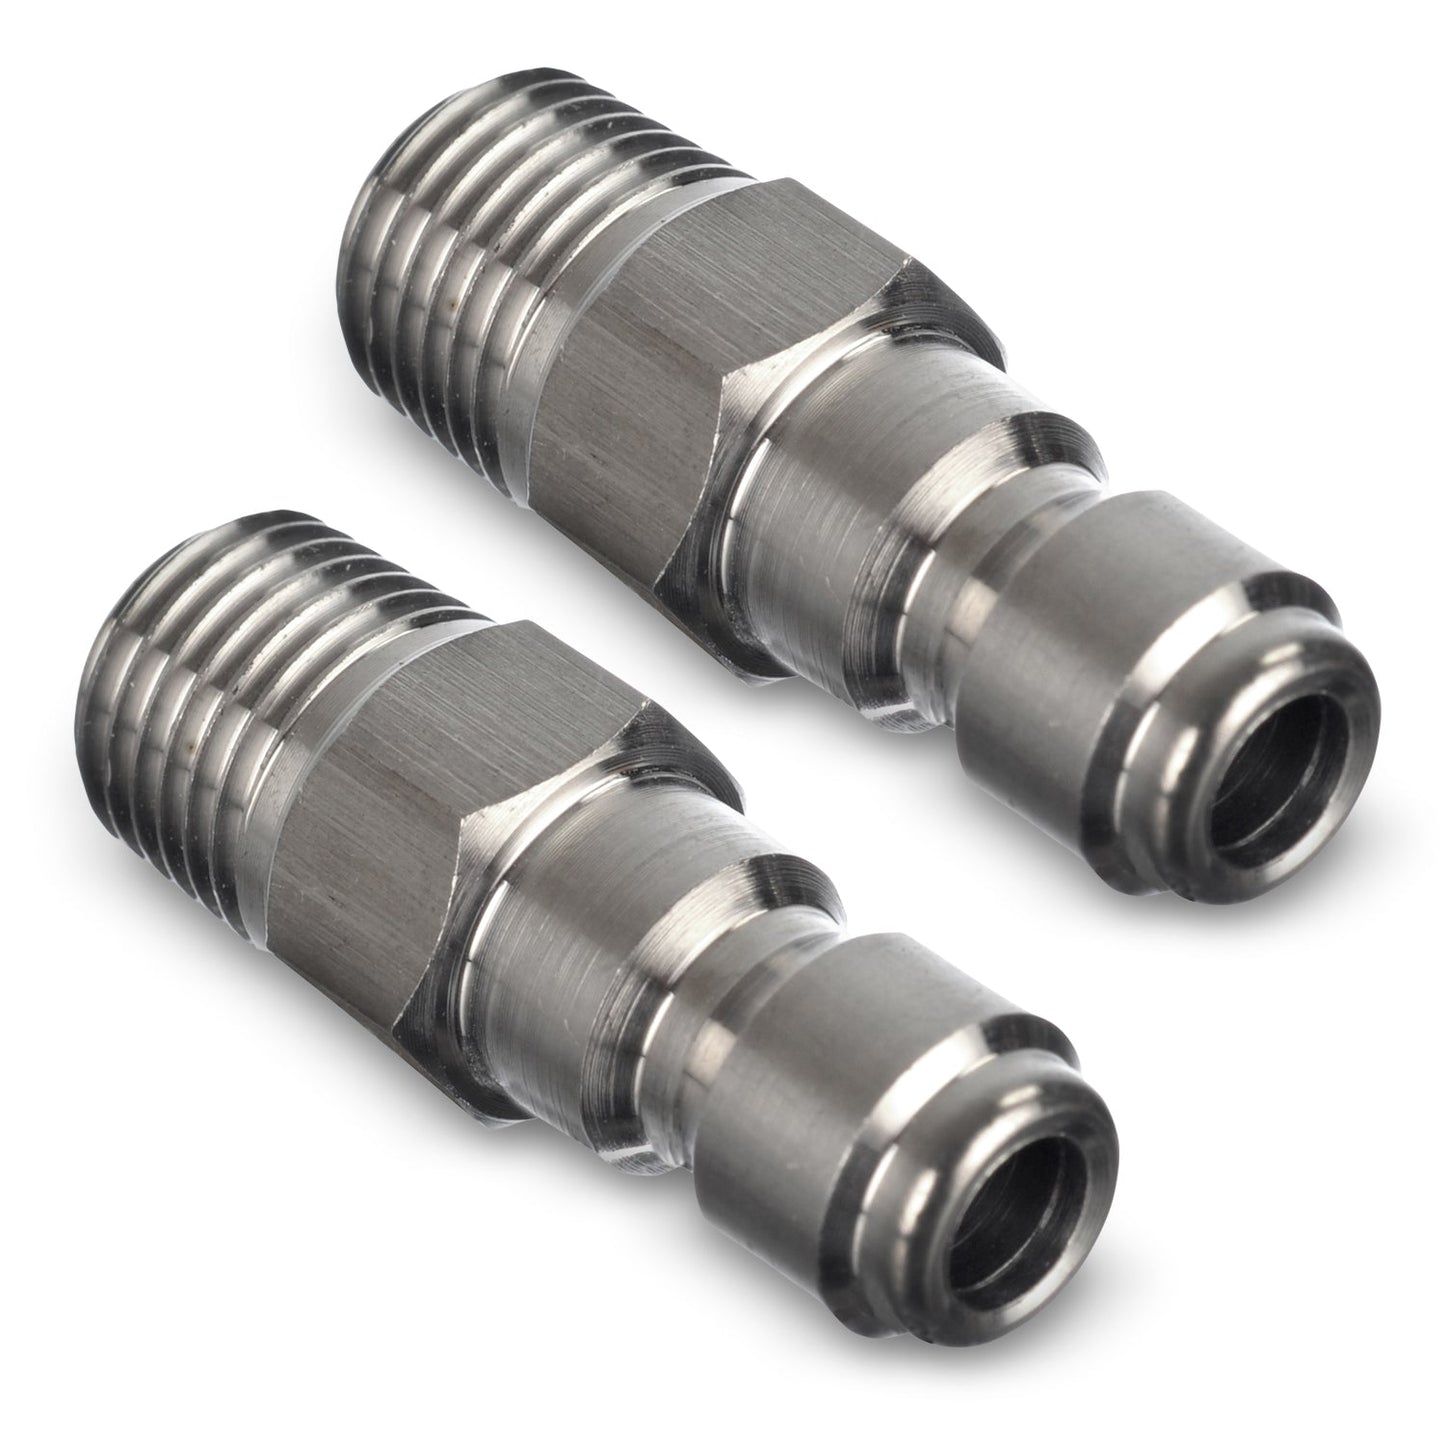 Stainless Steel Pressure Washer Quick Connect Plugs Set Of 2 | Male